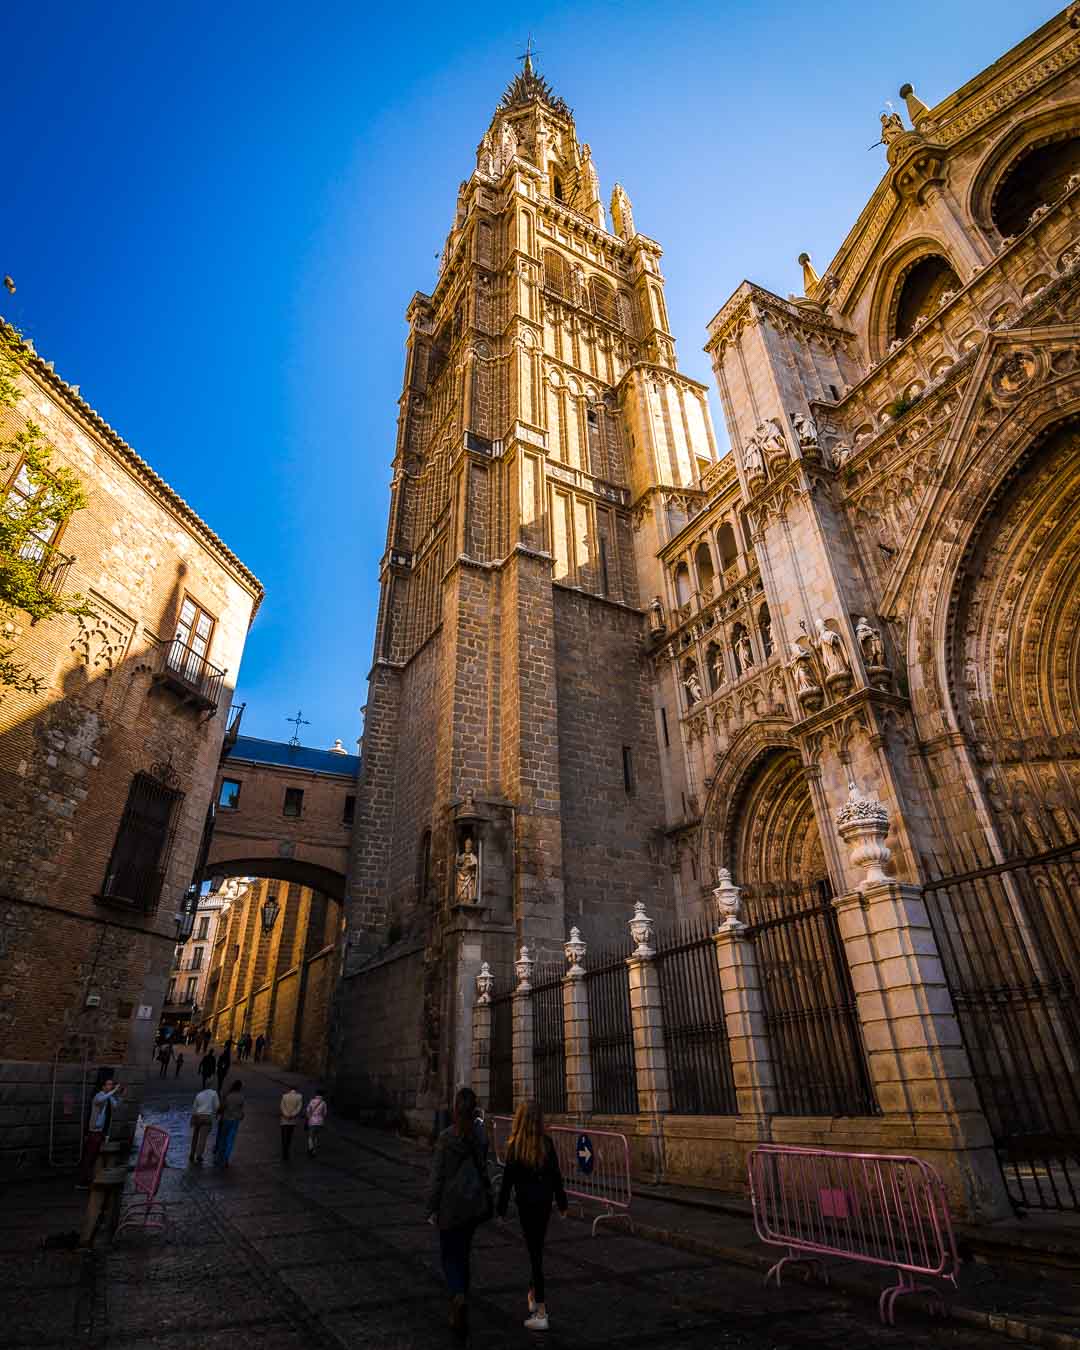 the main tower of the catedral primada toledo